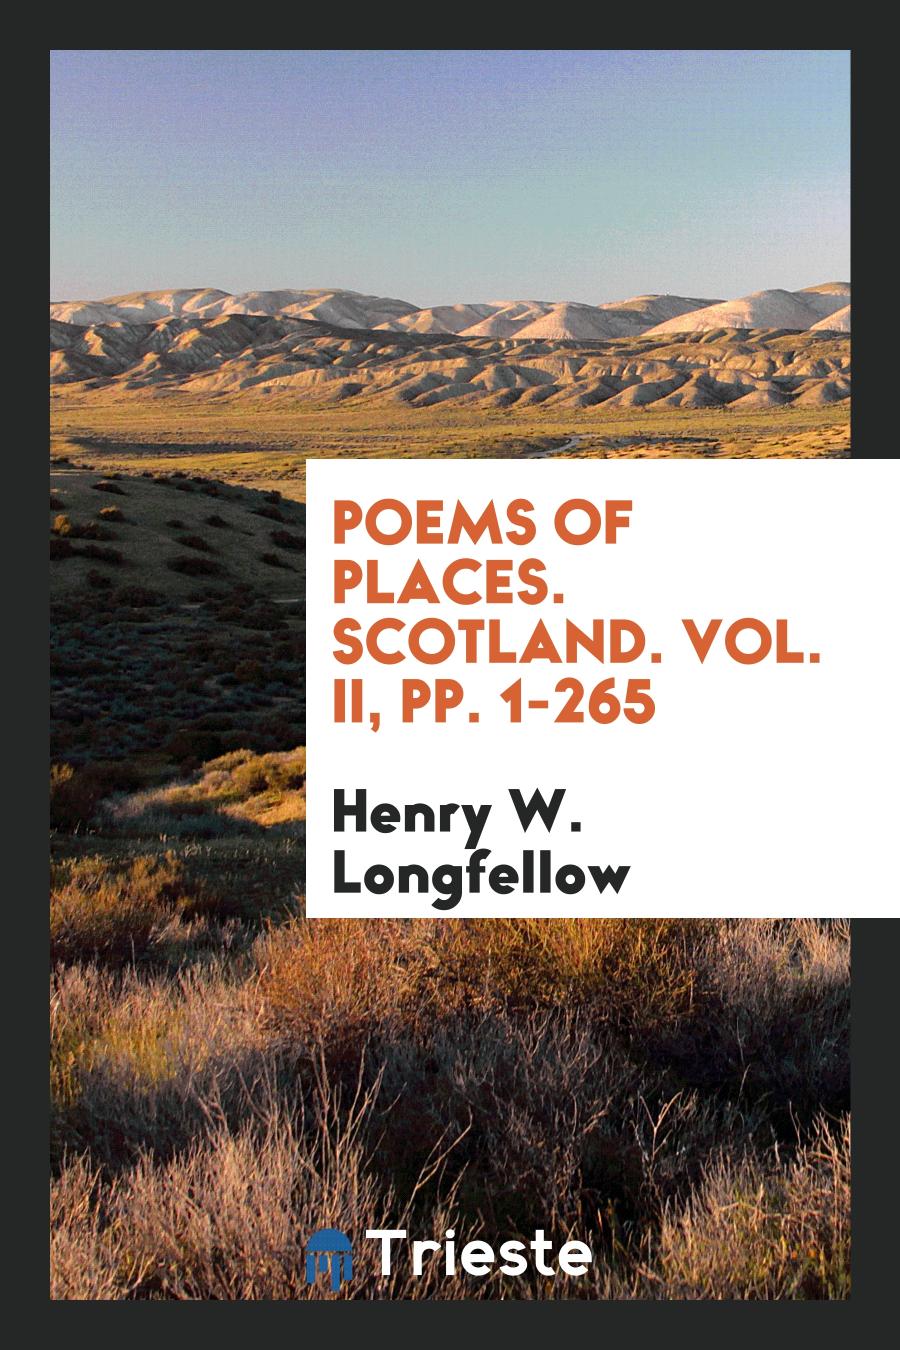 Poems of Places. Scotland. Vol. II, pp. 1-265